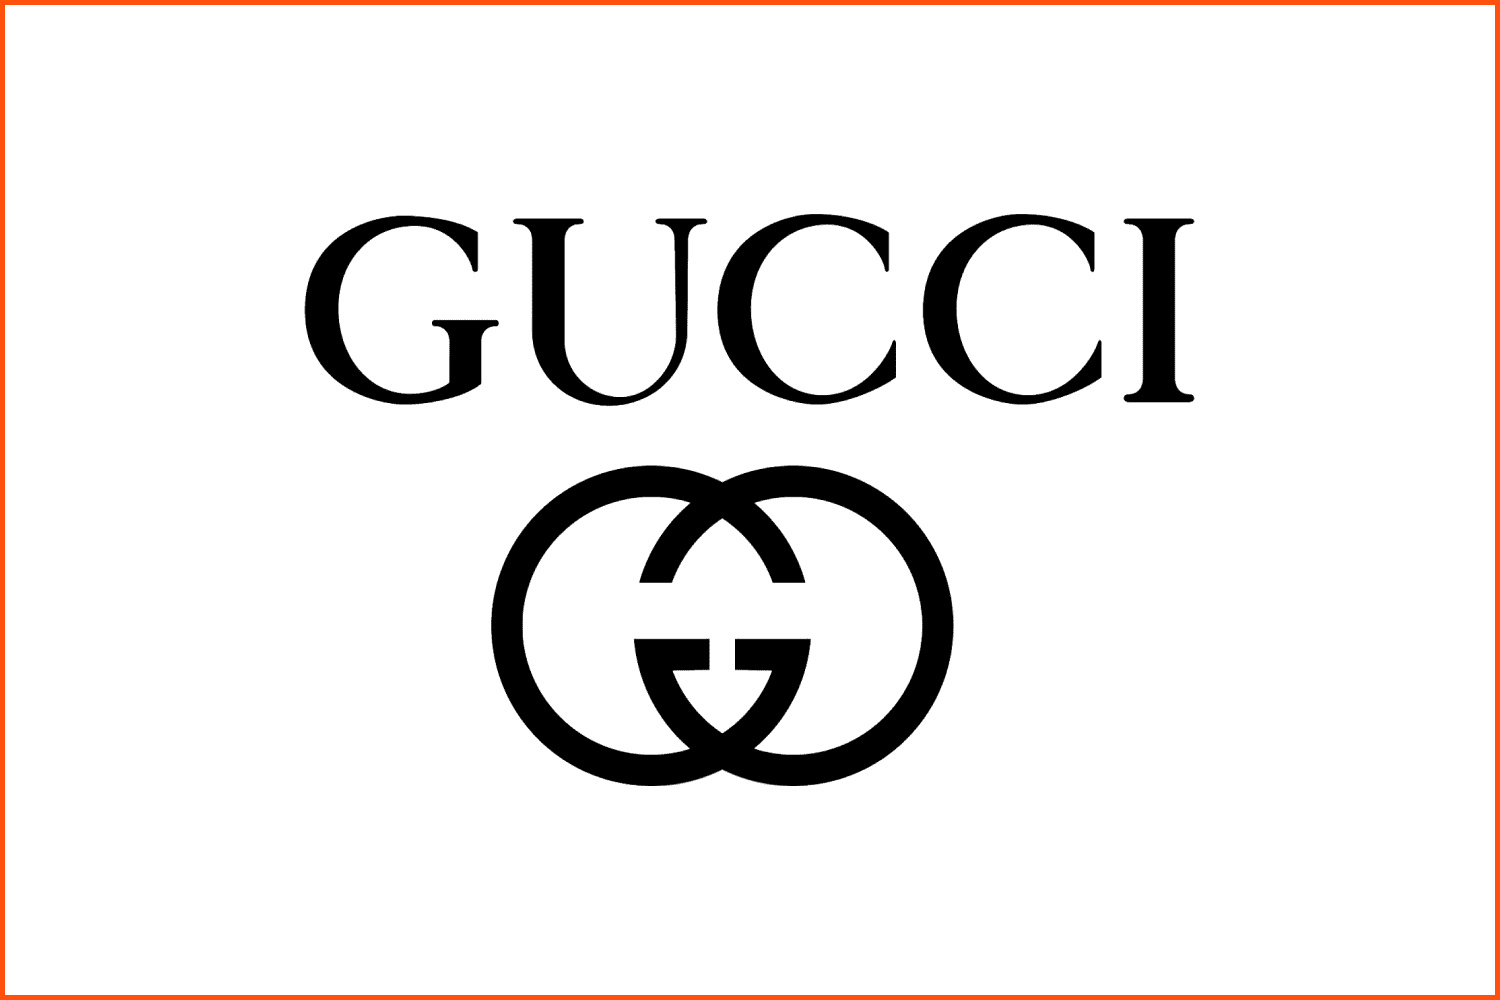 Do You Know How Gucci, LV & Other Labels Designed Their Logos?